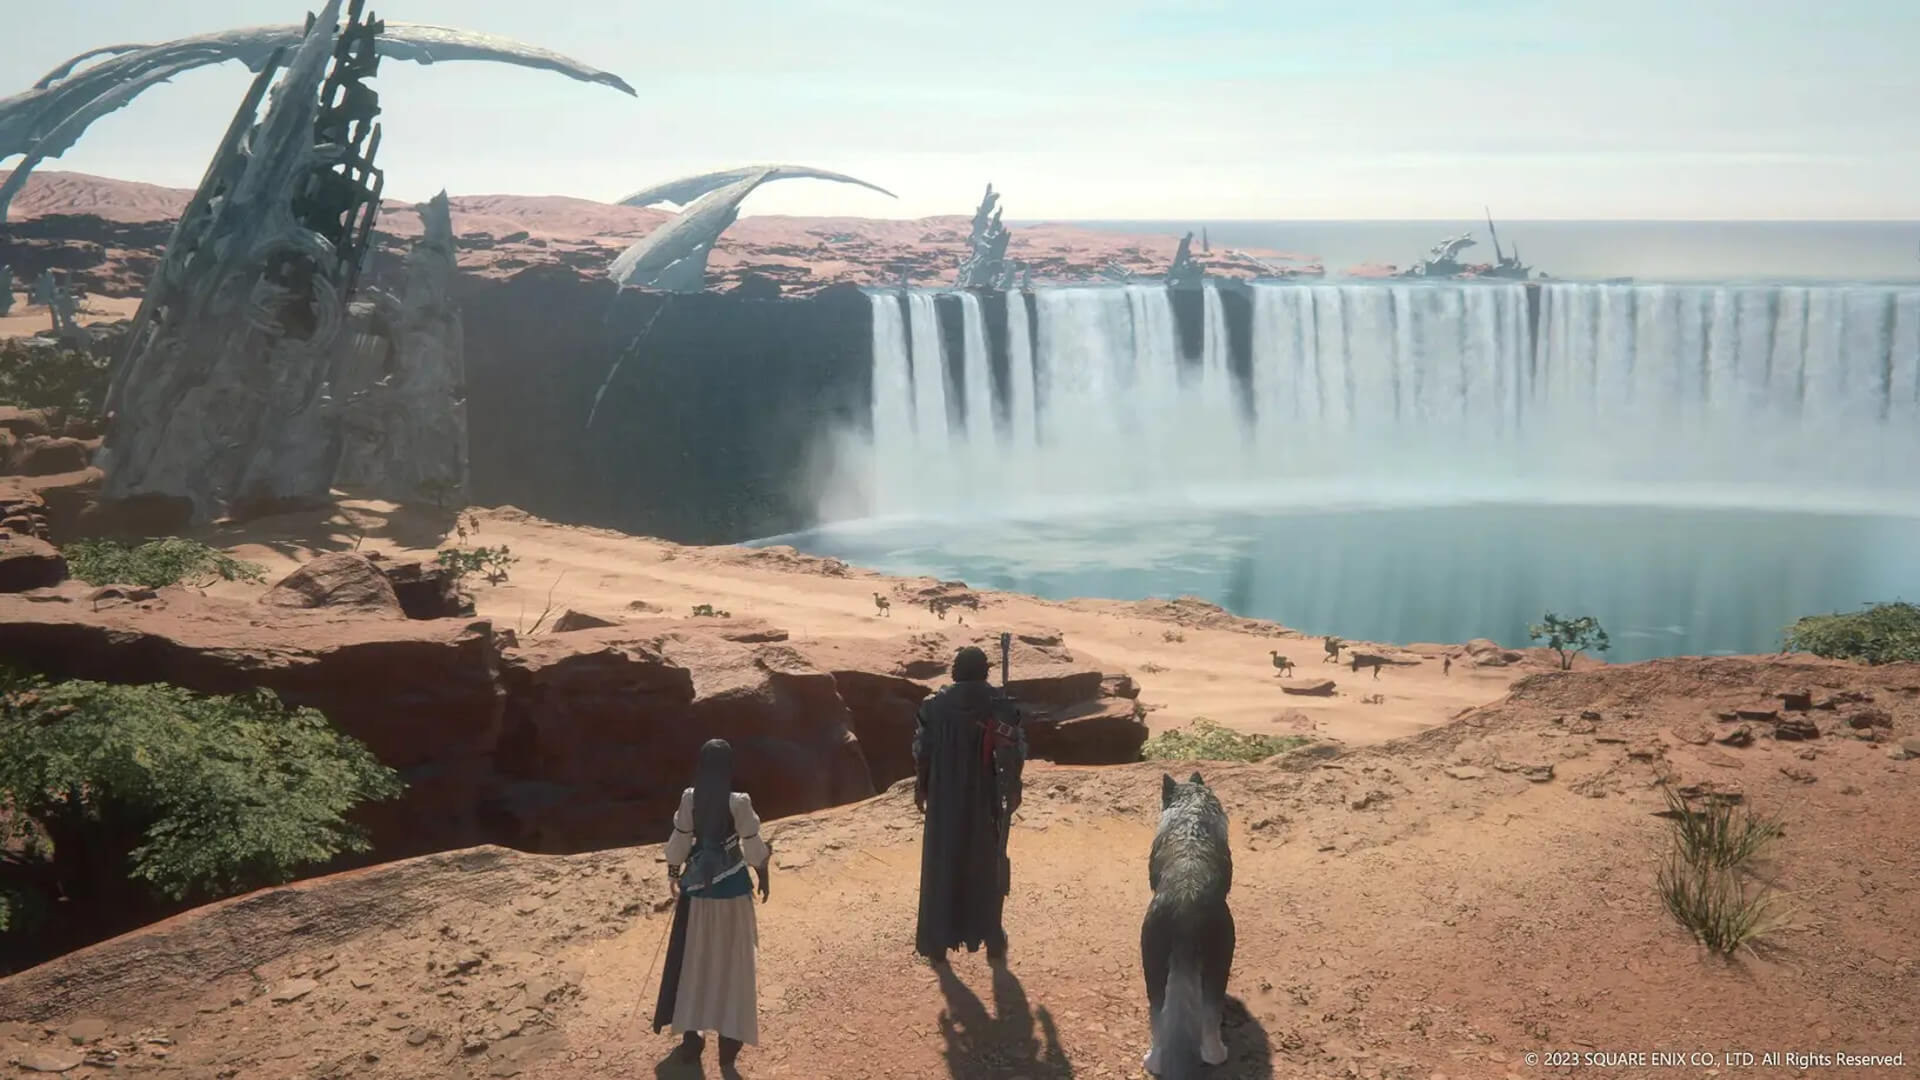 Clive and his friends standing in front of a huge waterfall in Final Fantasy XVI